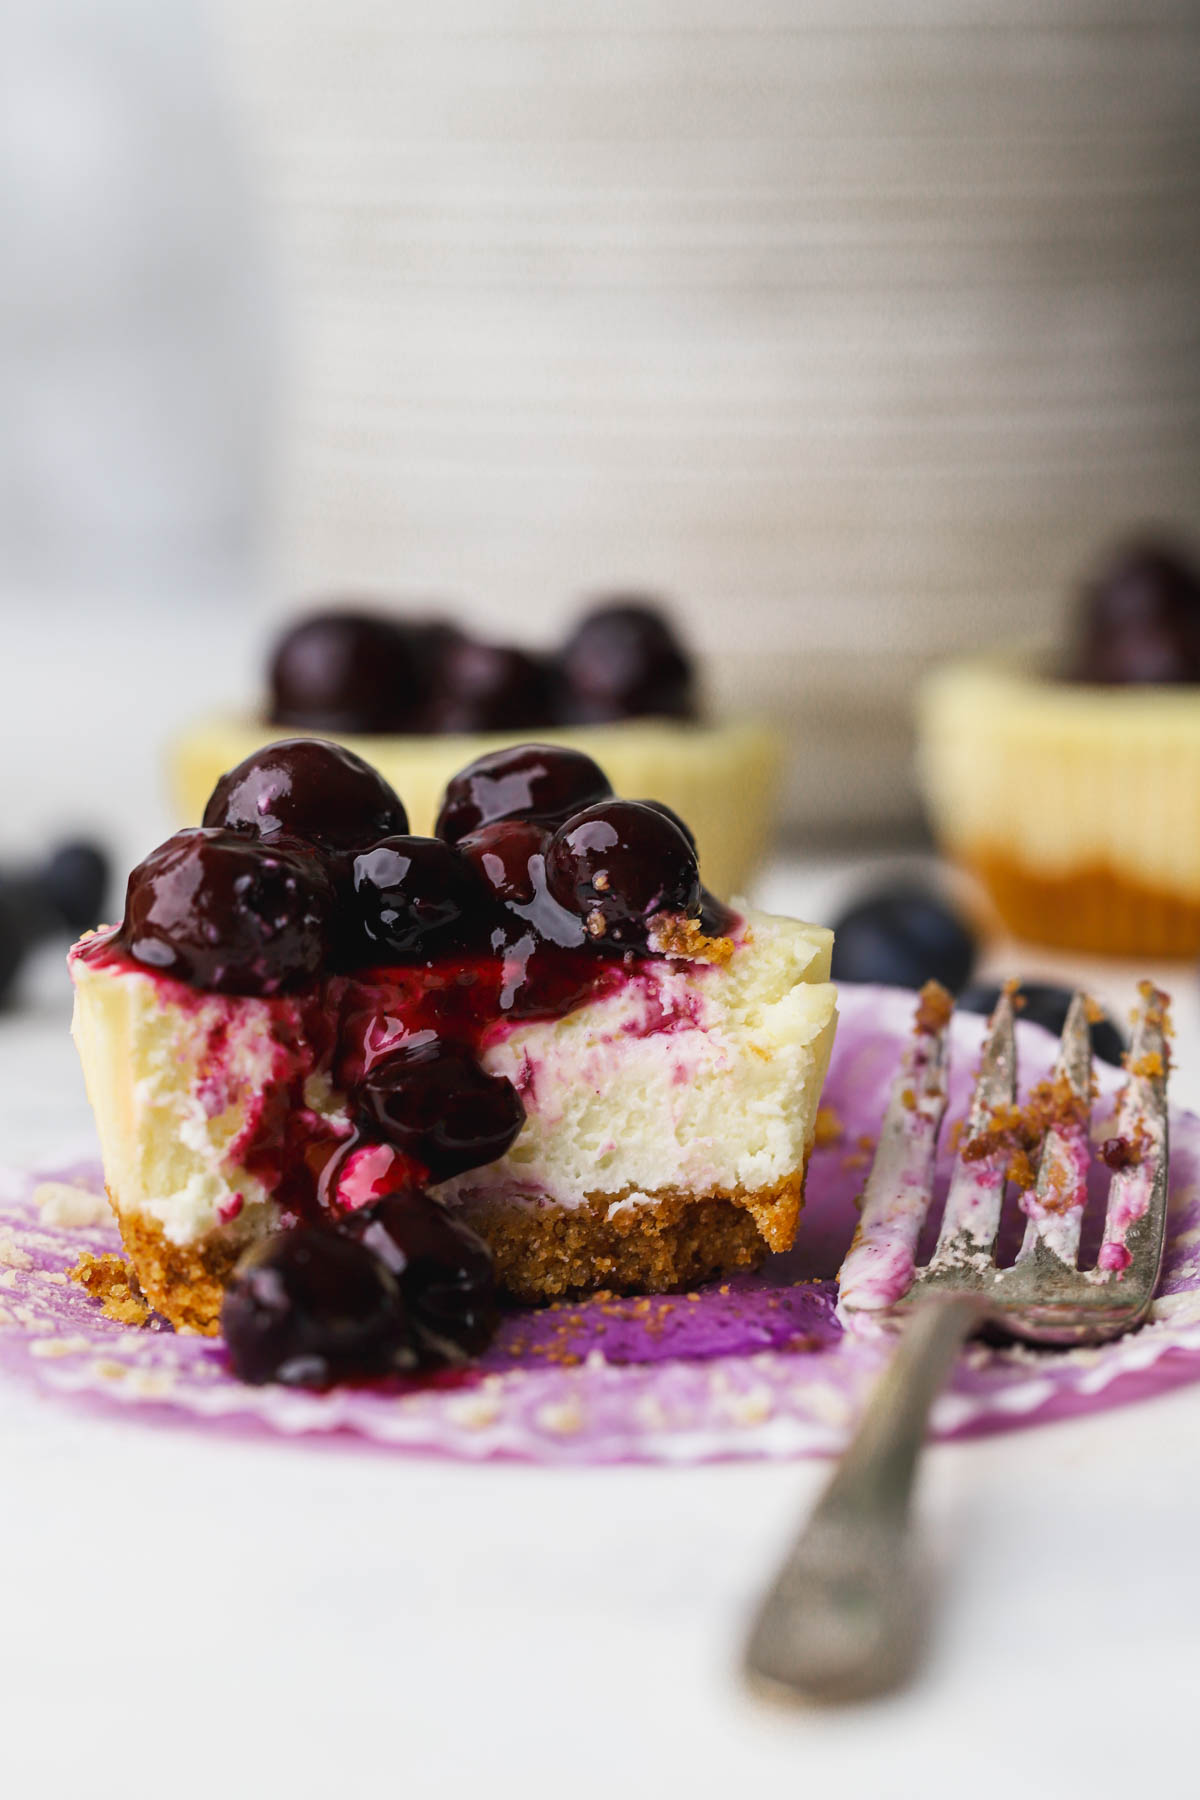 Mini blueberry cheesecake with graham cracker crust and blueberry compote.  